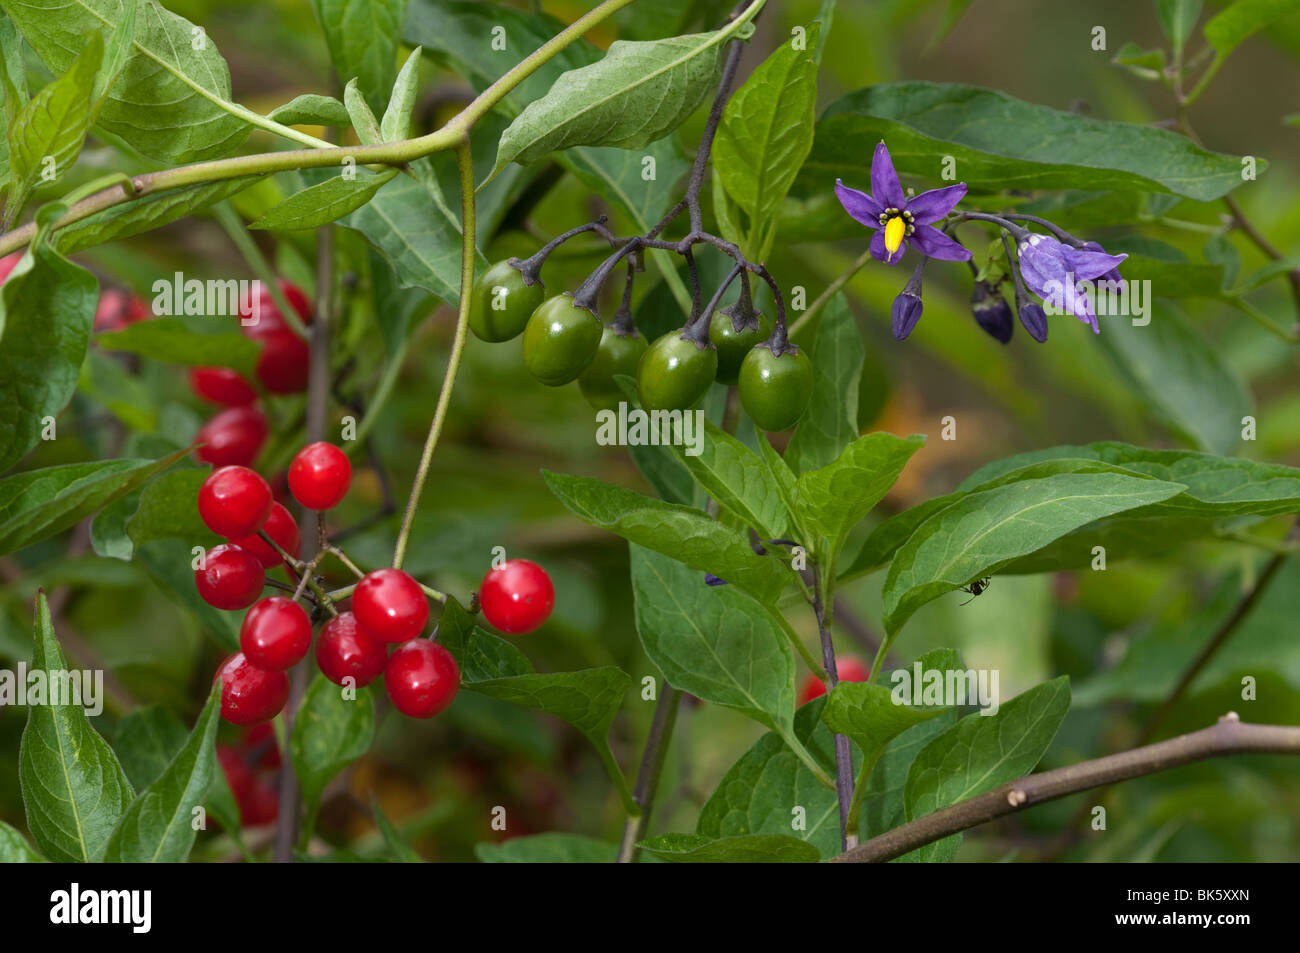 Bittersweet Nightshade, Deadly Nightshade (Solanum dulcamara), plant with ripe and unripe berries and flowers. Stock Photo